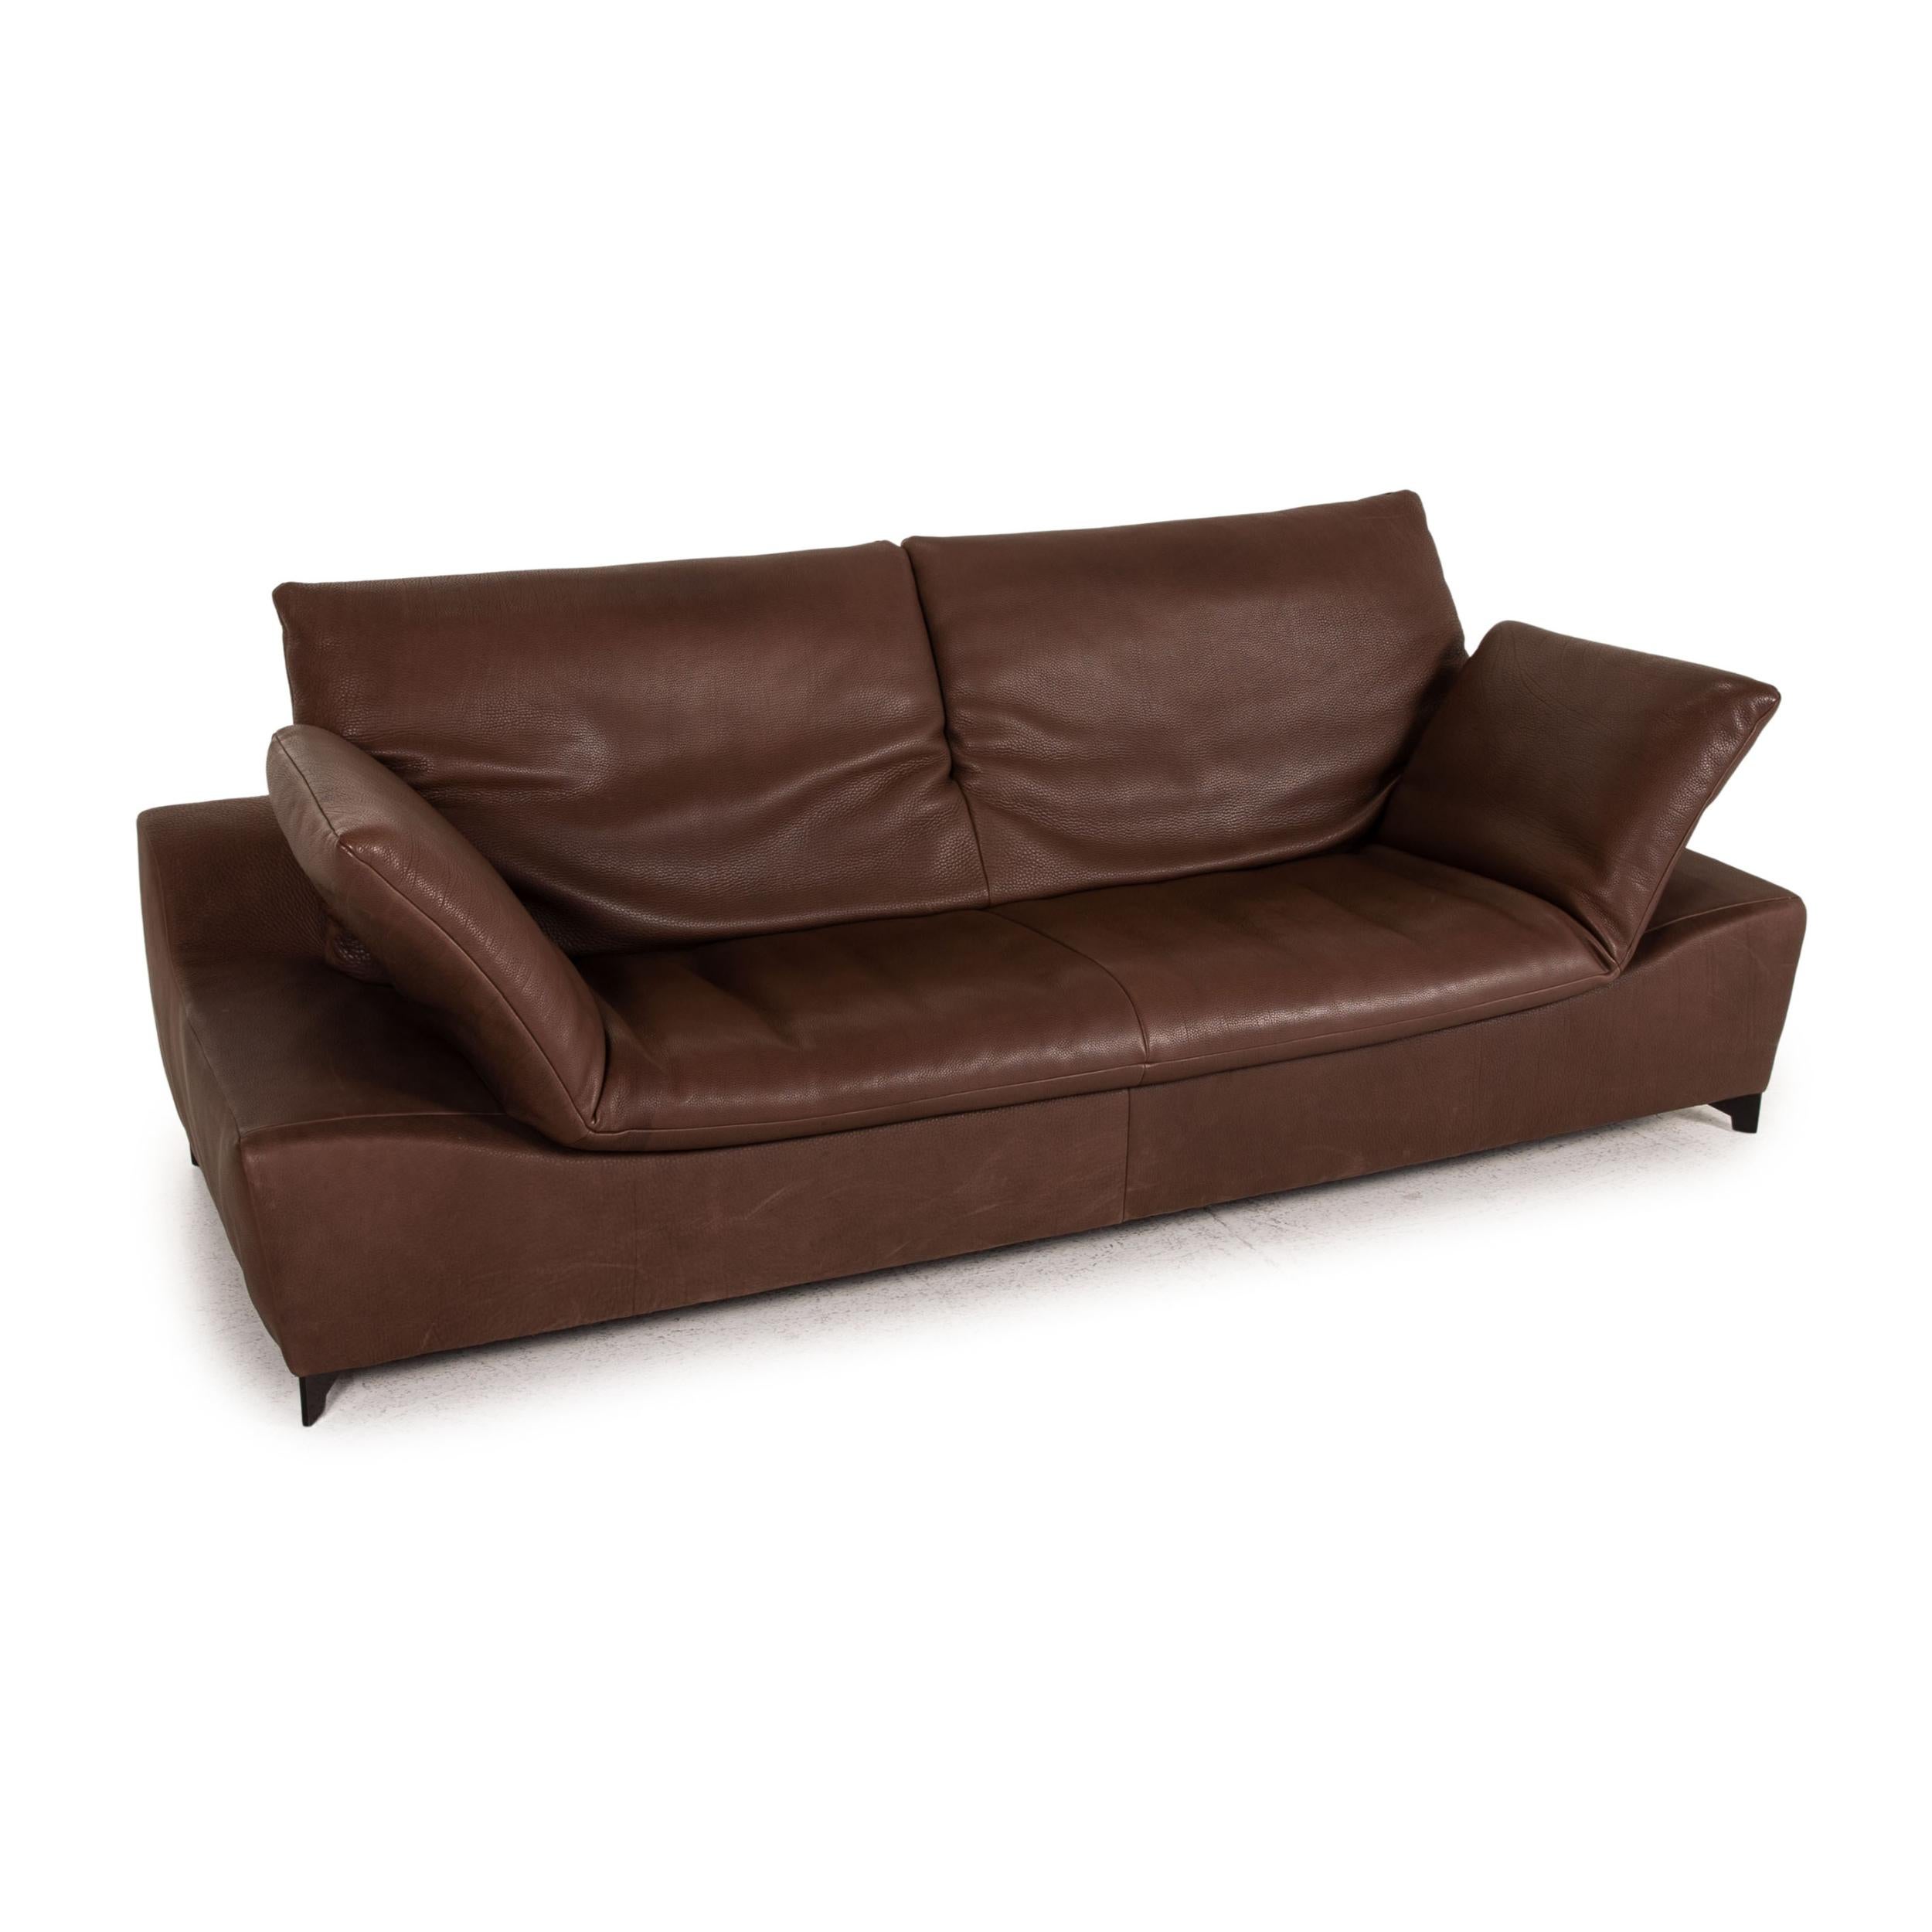 Modern Who's Perfect Minnesota Leather Sofa Set Brown 1 Three-Seater 1 Stool Function For Sale